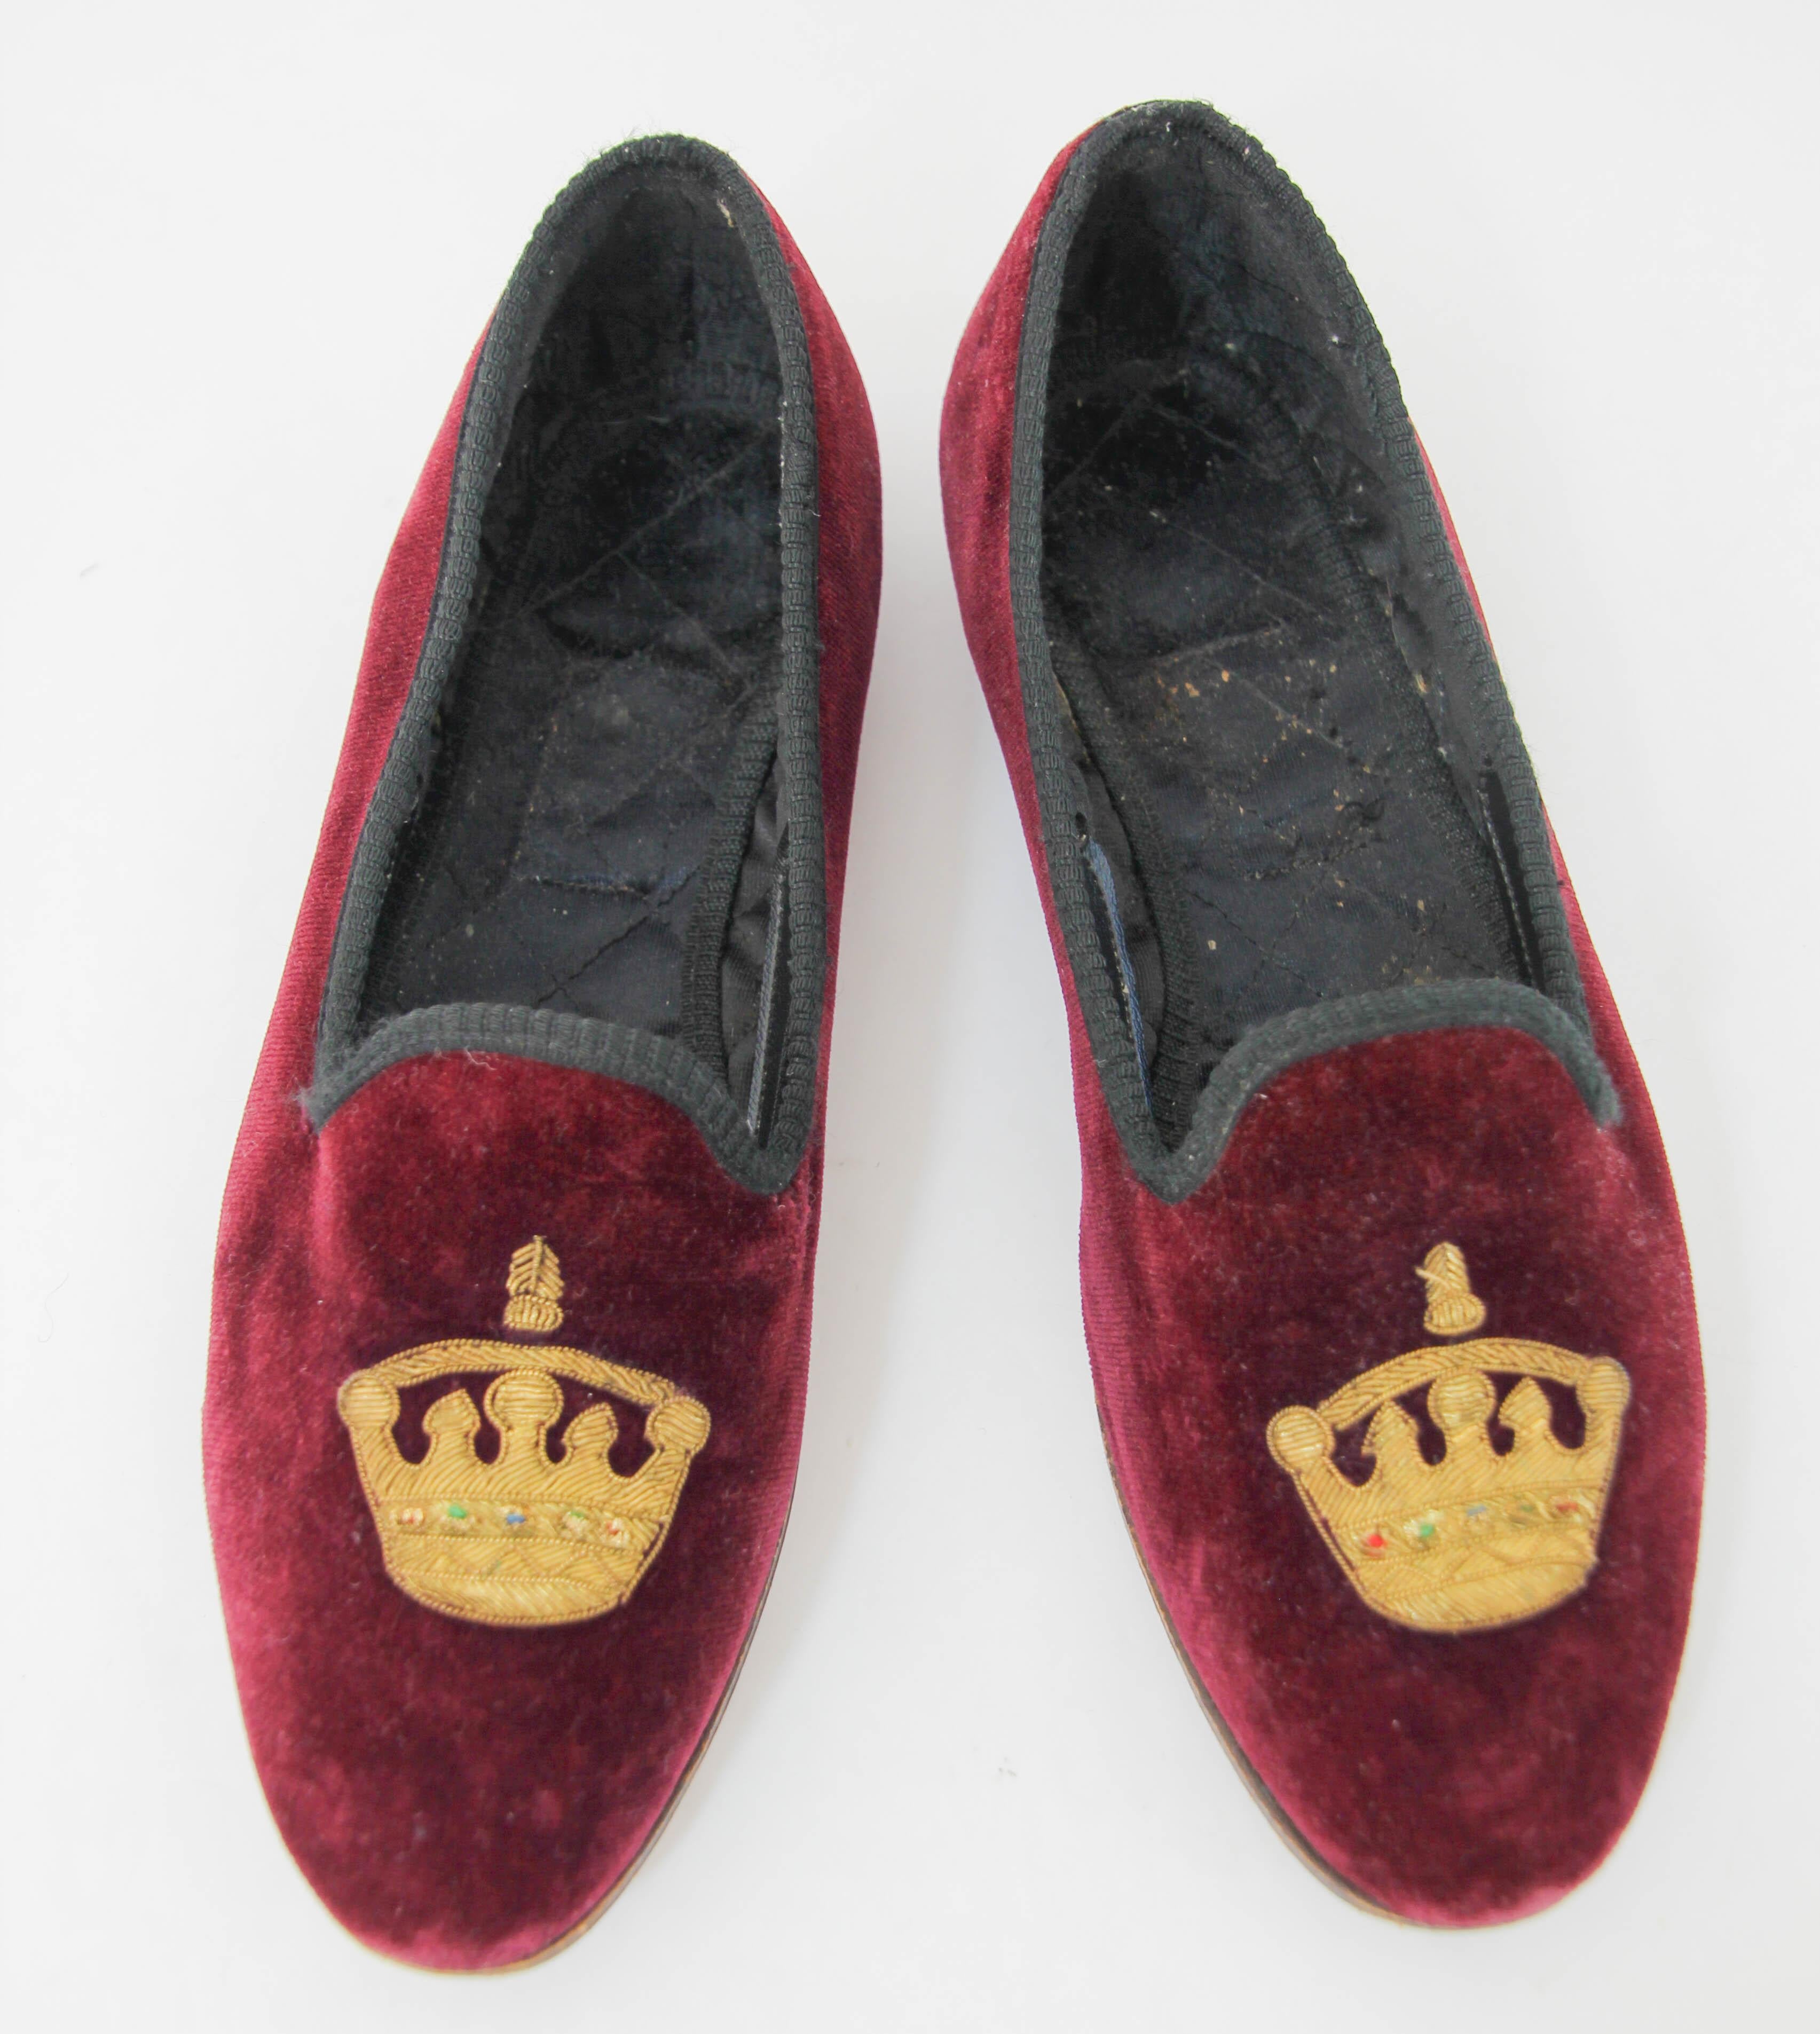 British Crown Embroidery Velvet Burgundy Loafers Slip On Size 6.5 For Sale 10